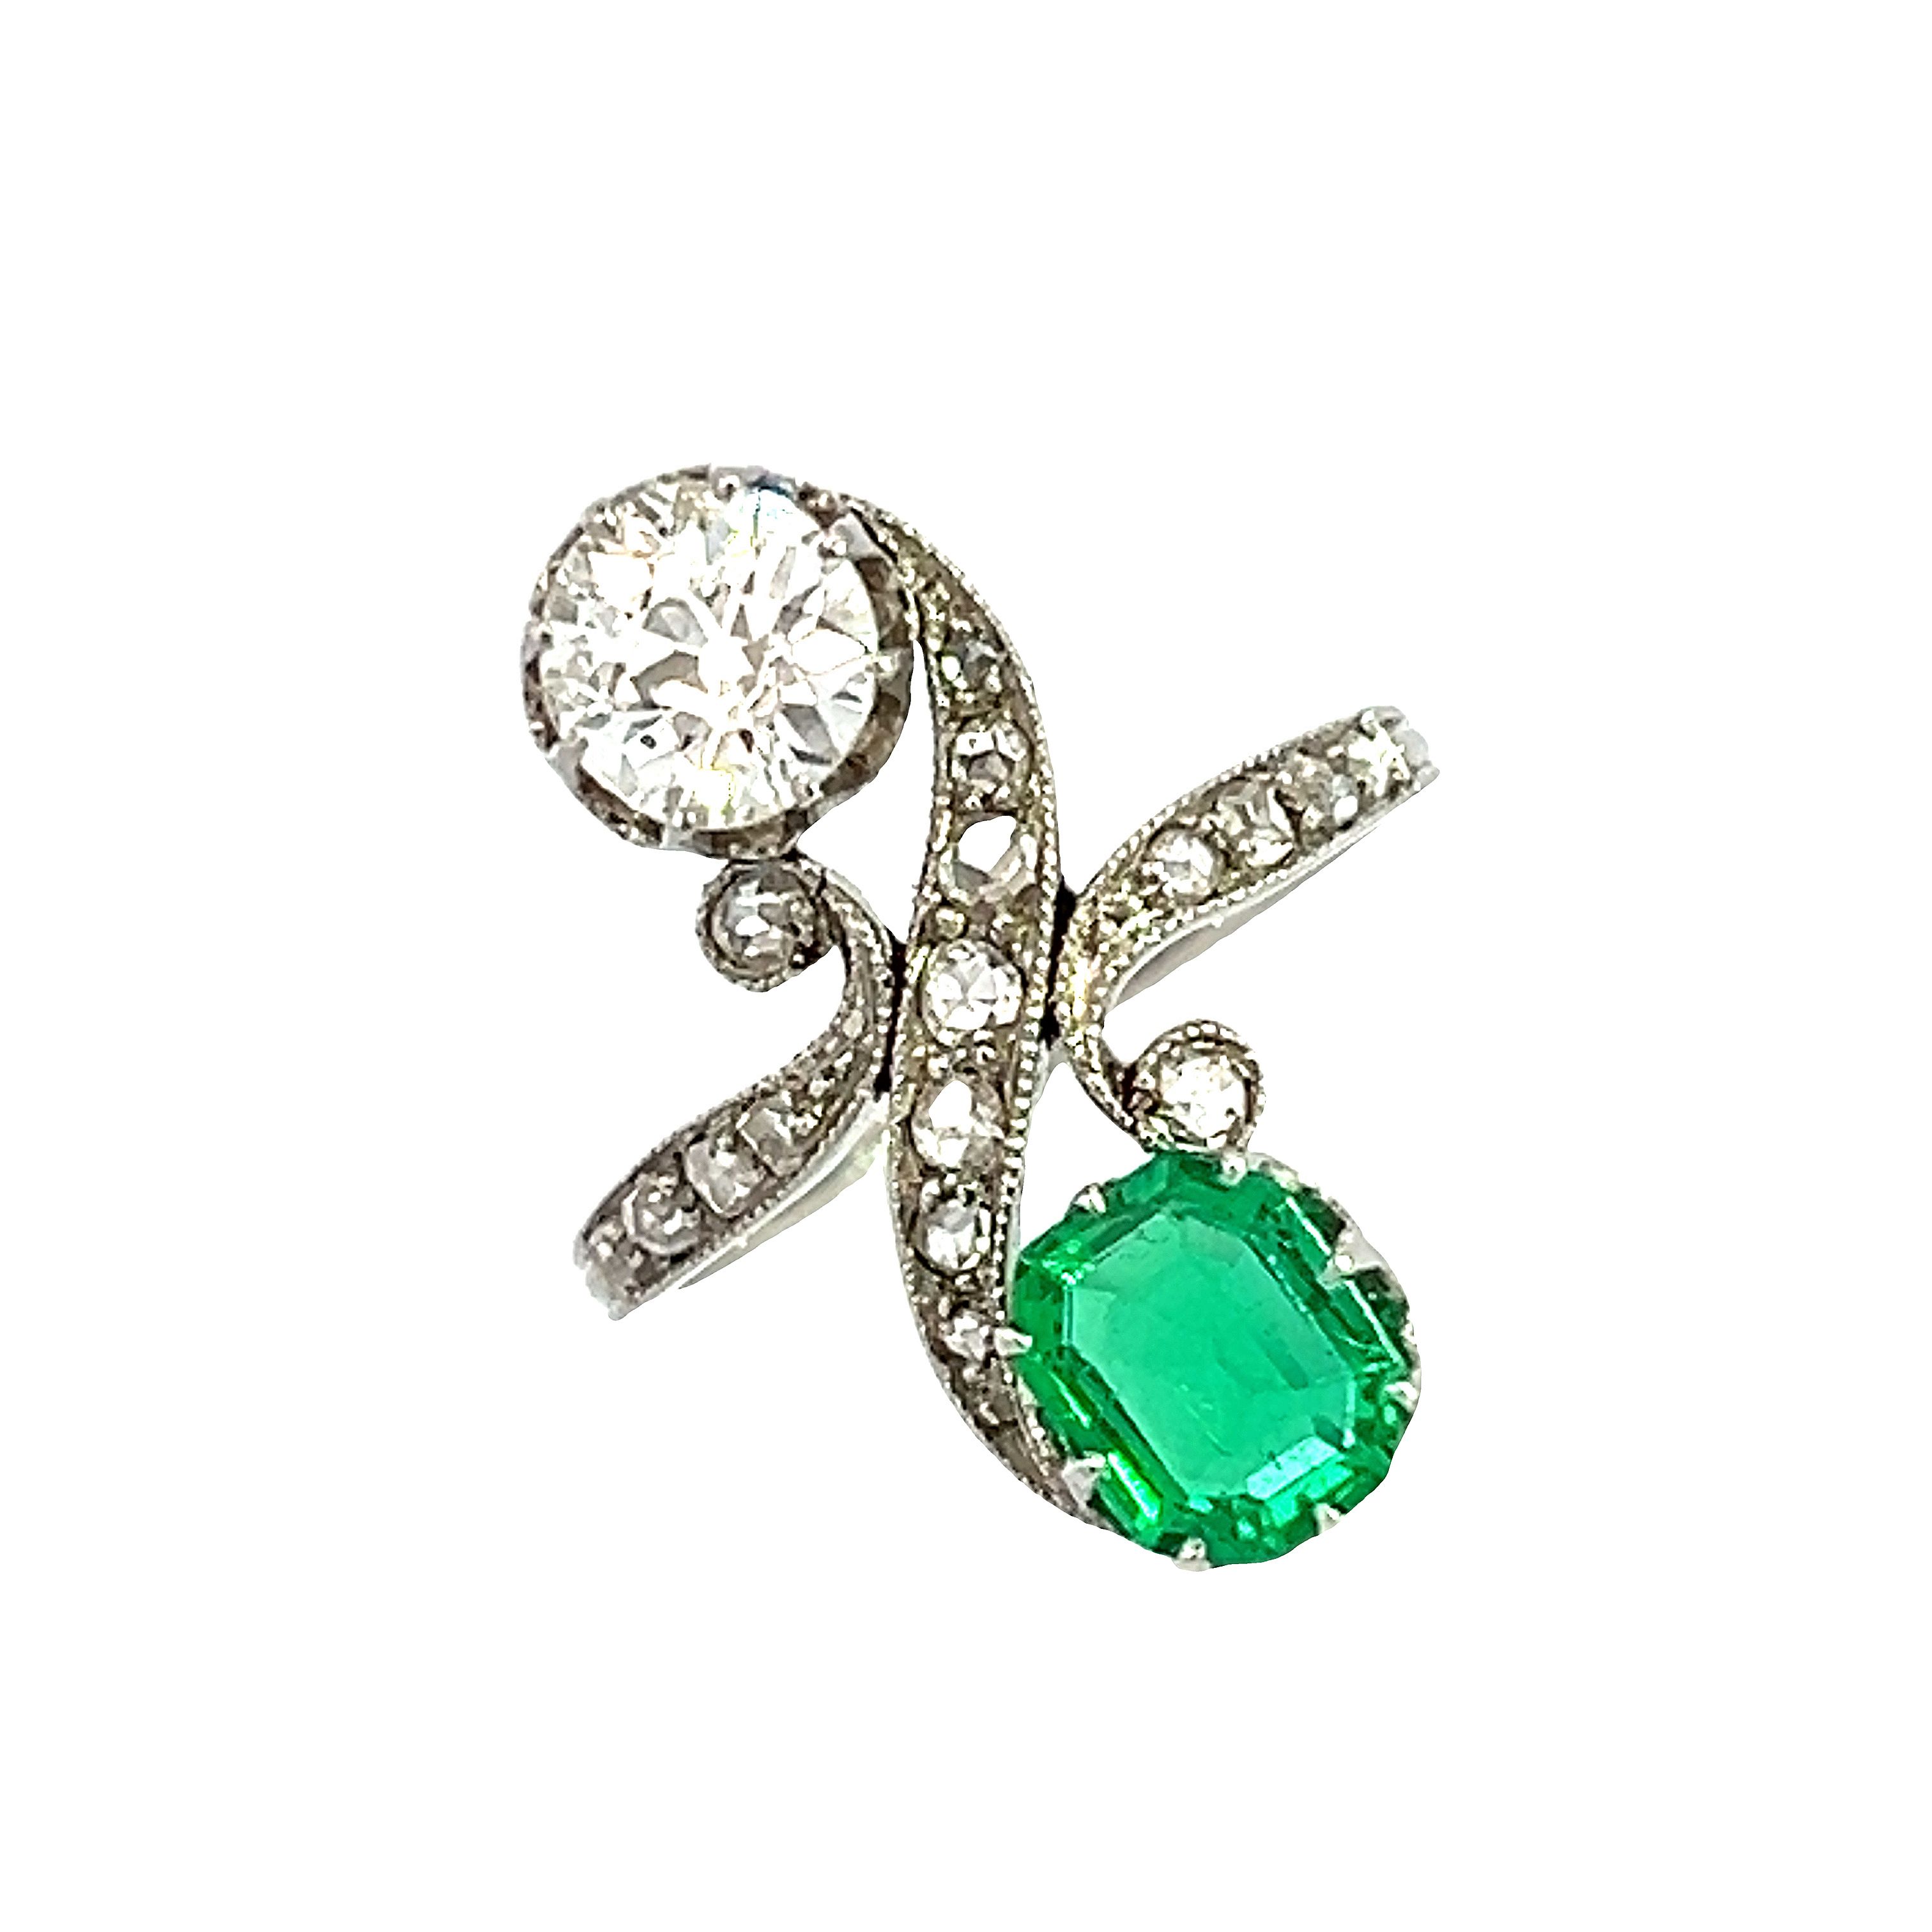 An Exquisite Edwardian Emerald and Diamond Ring